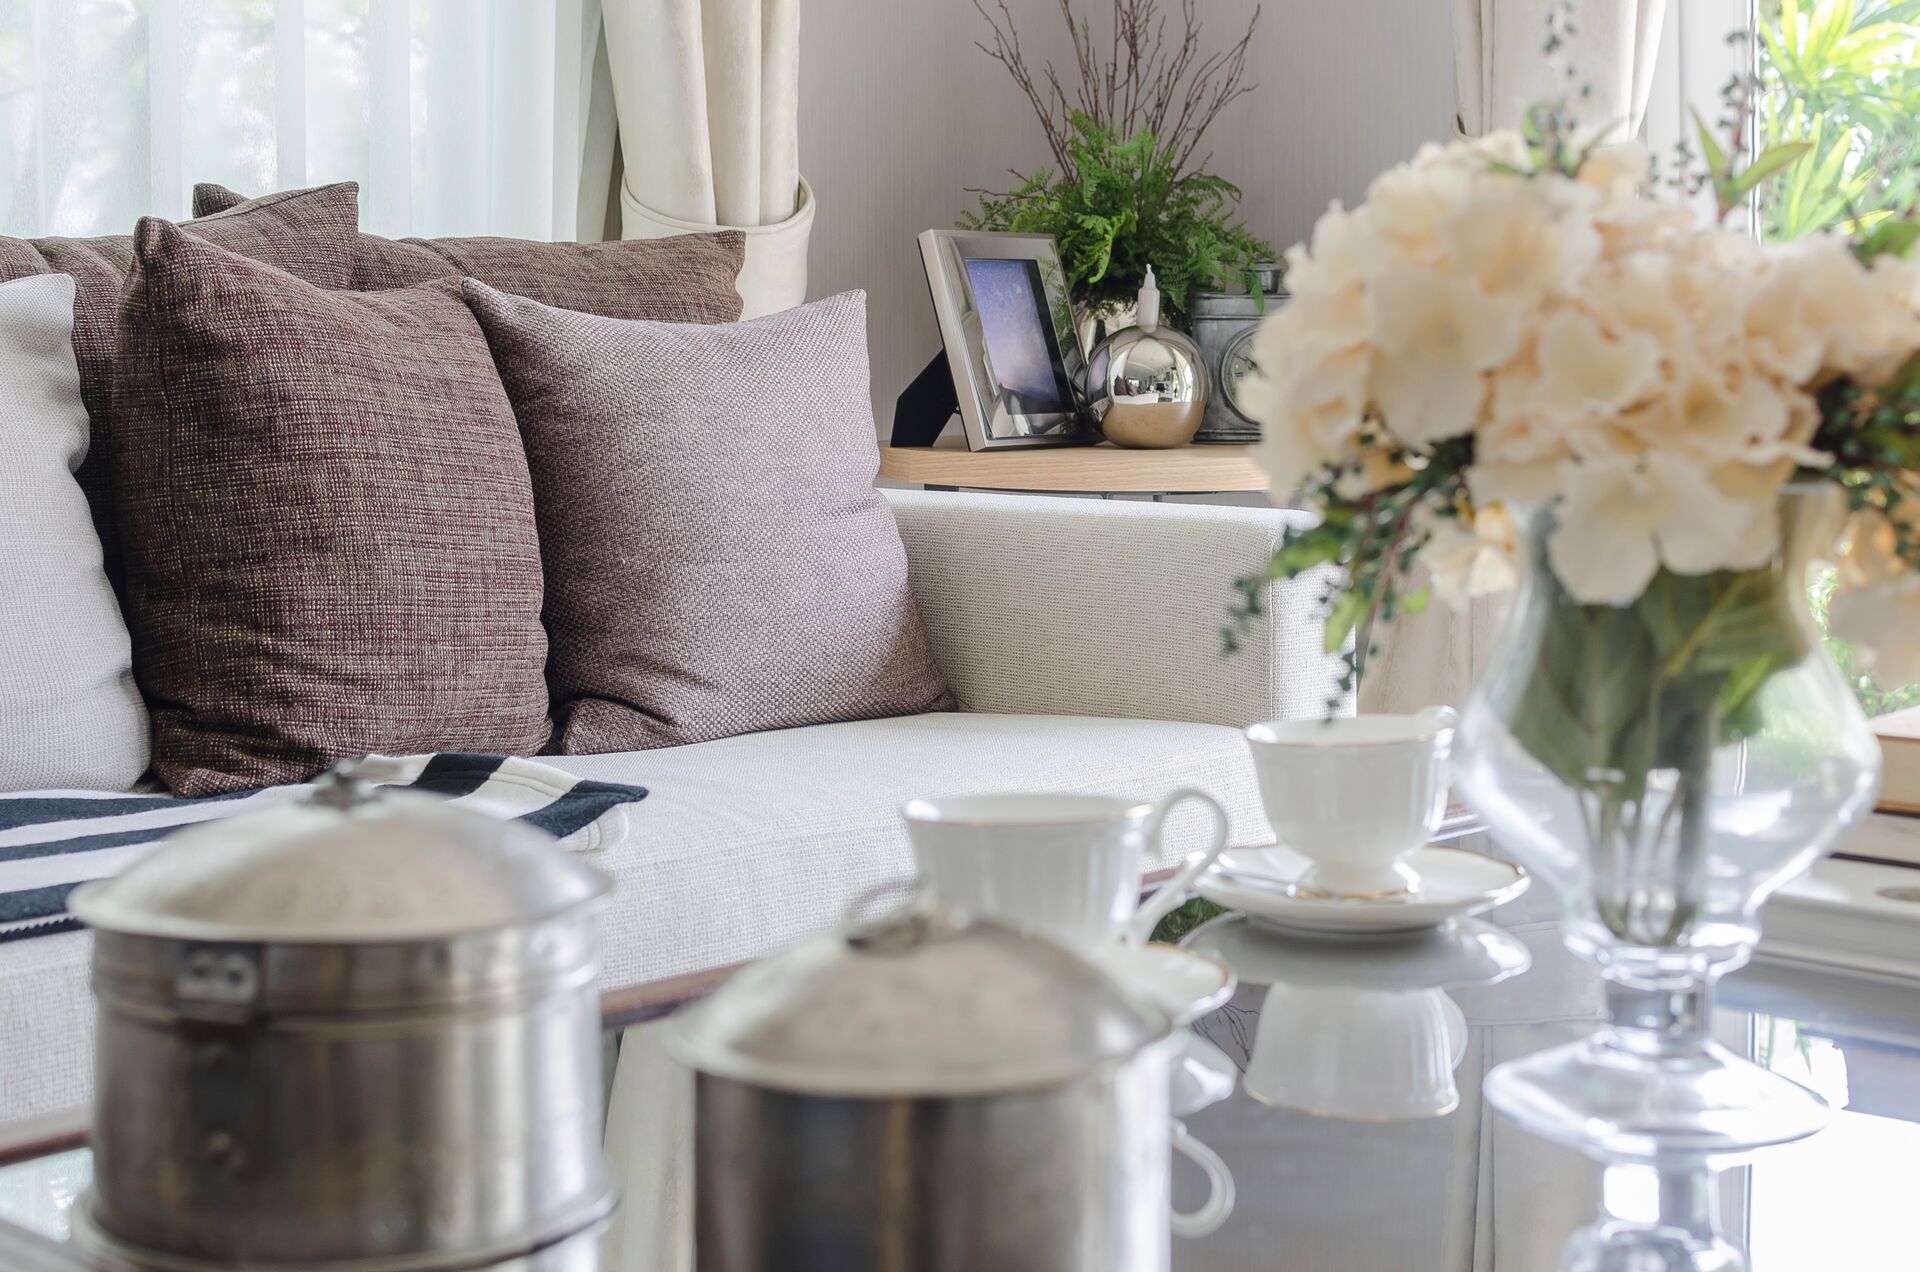 A light and airy living room with fresh flowers and china on the coffee table.